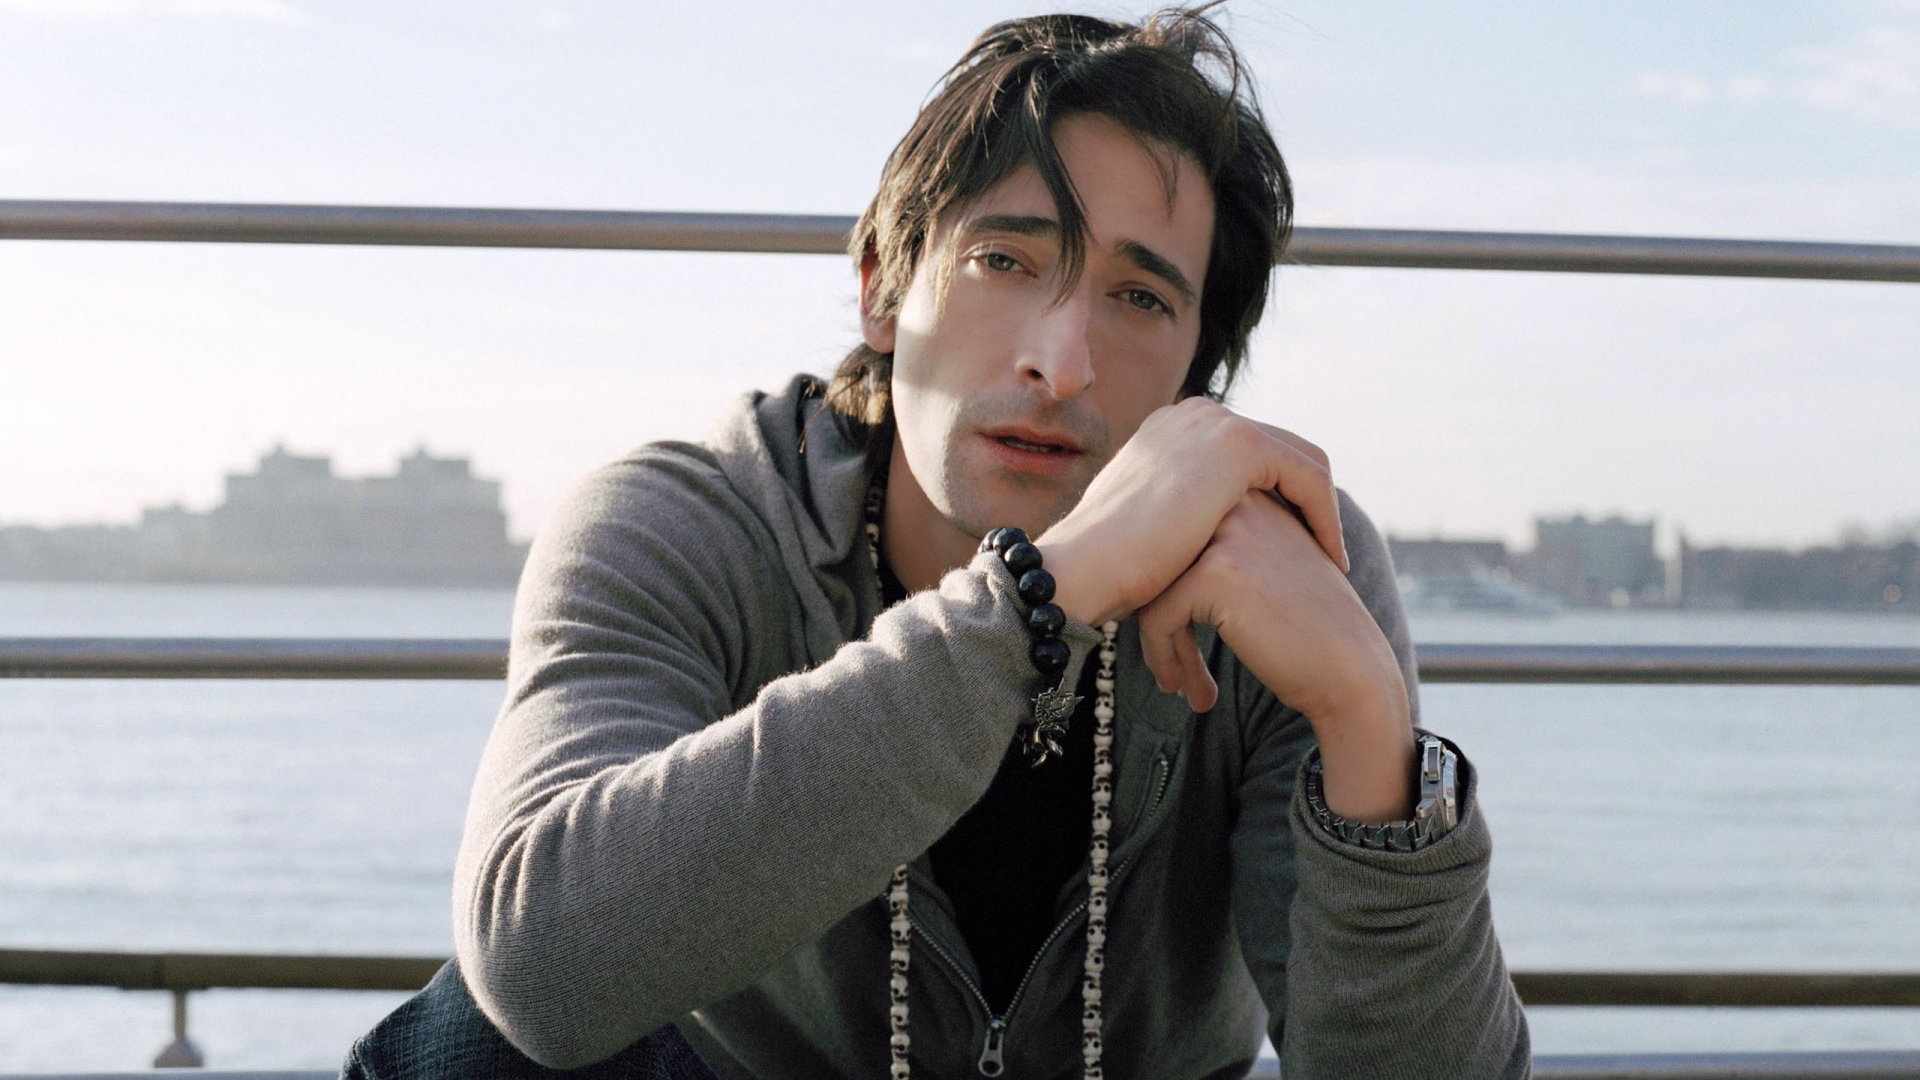 Adrien Brody for 1920 x 1080 HDTV 1080p resolution